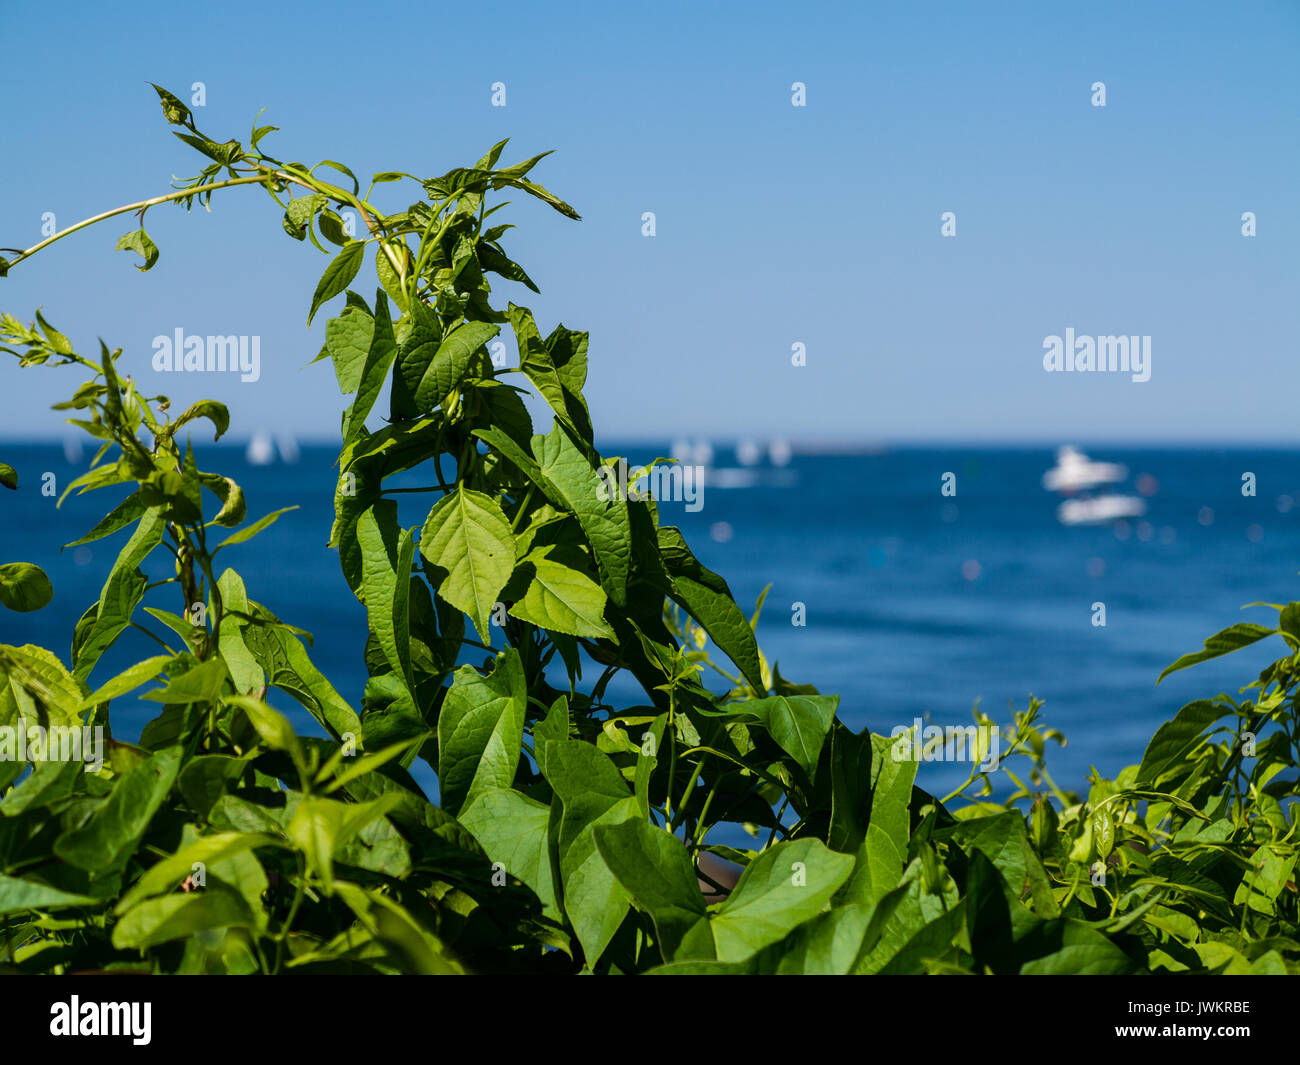 Growing green vine by the blue sea Stock Photo